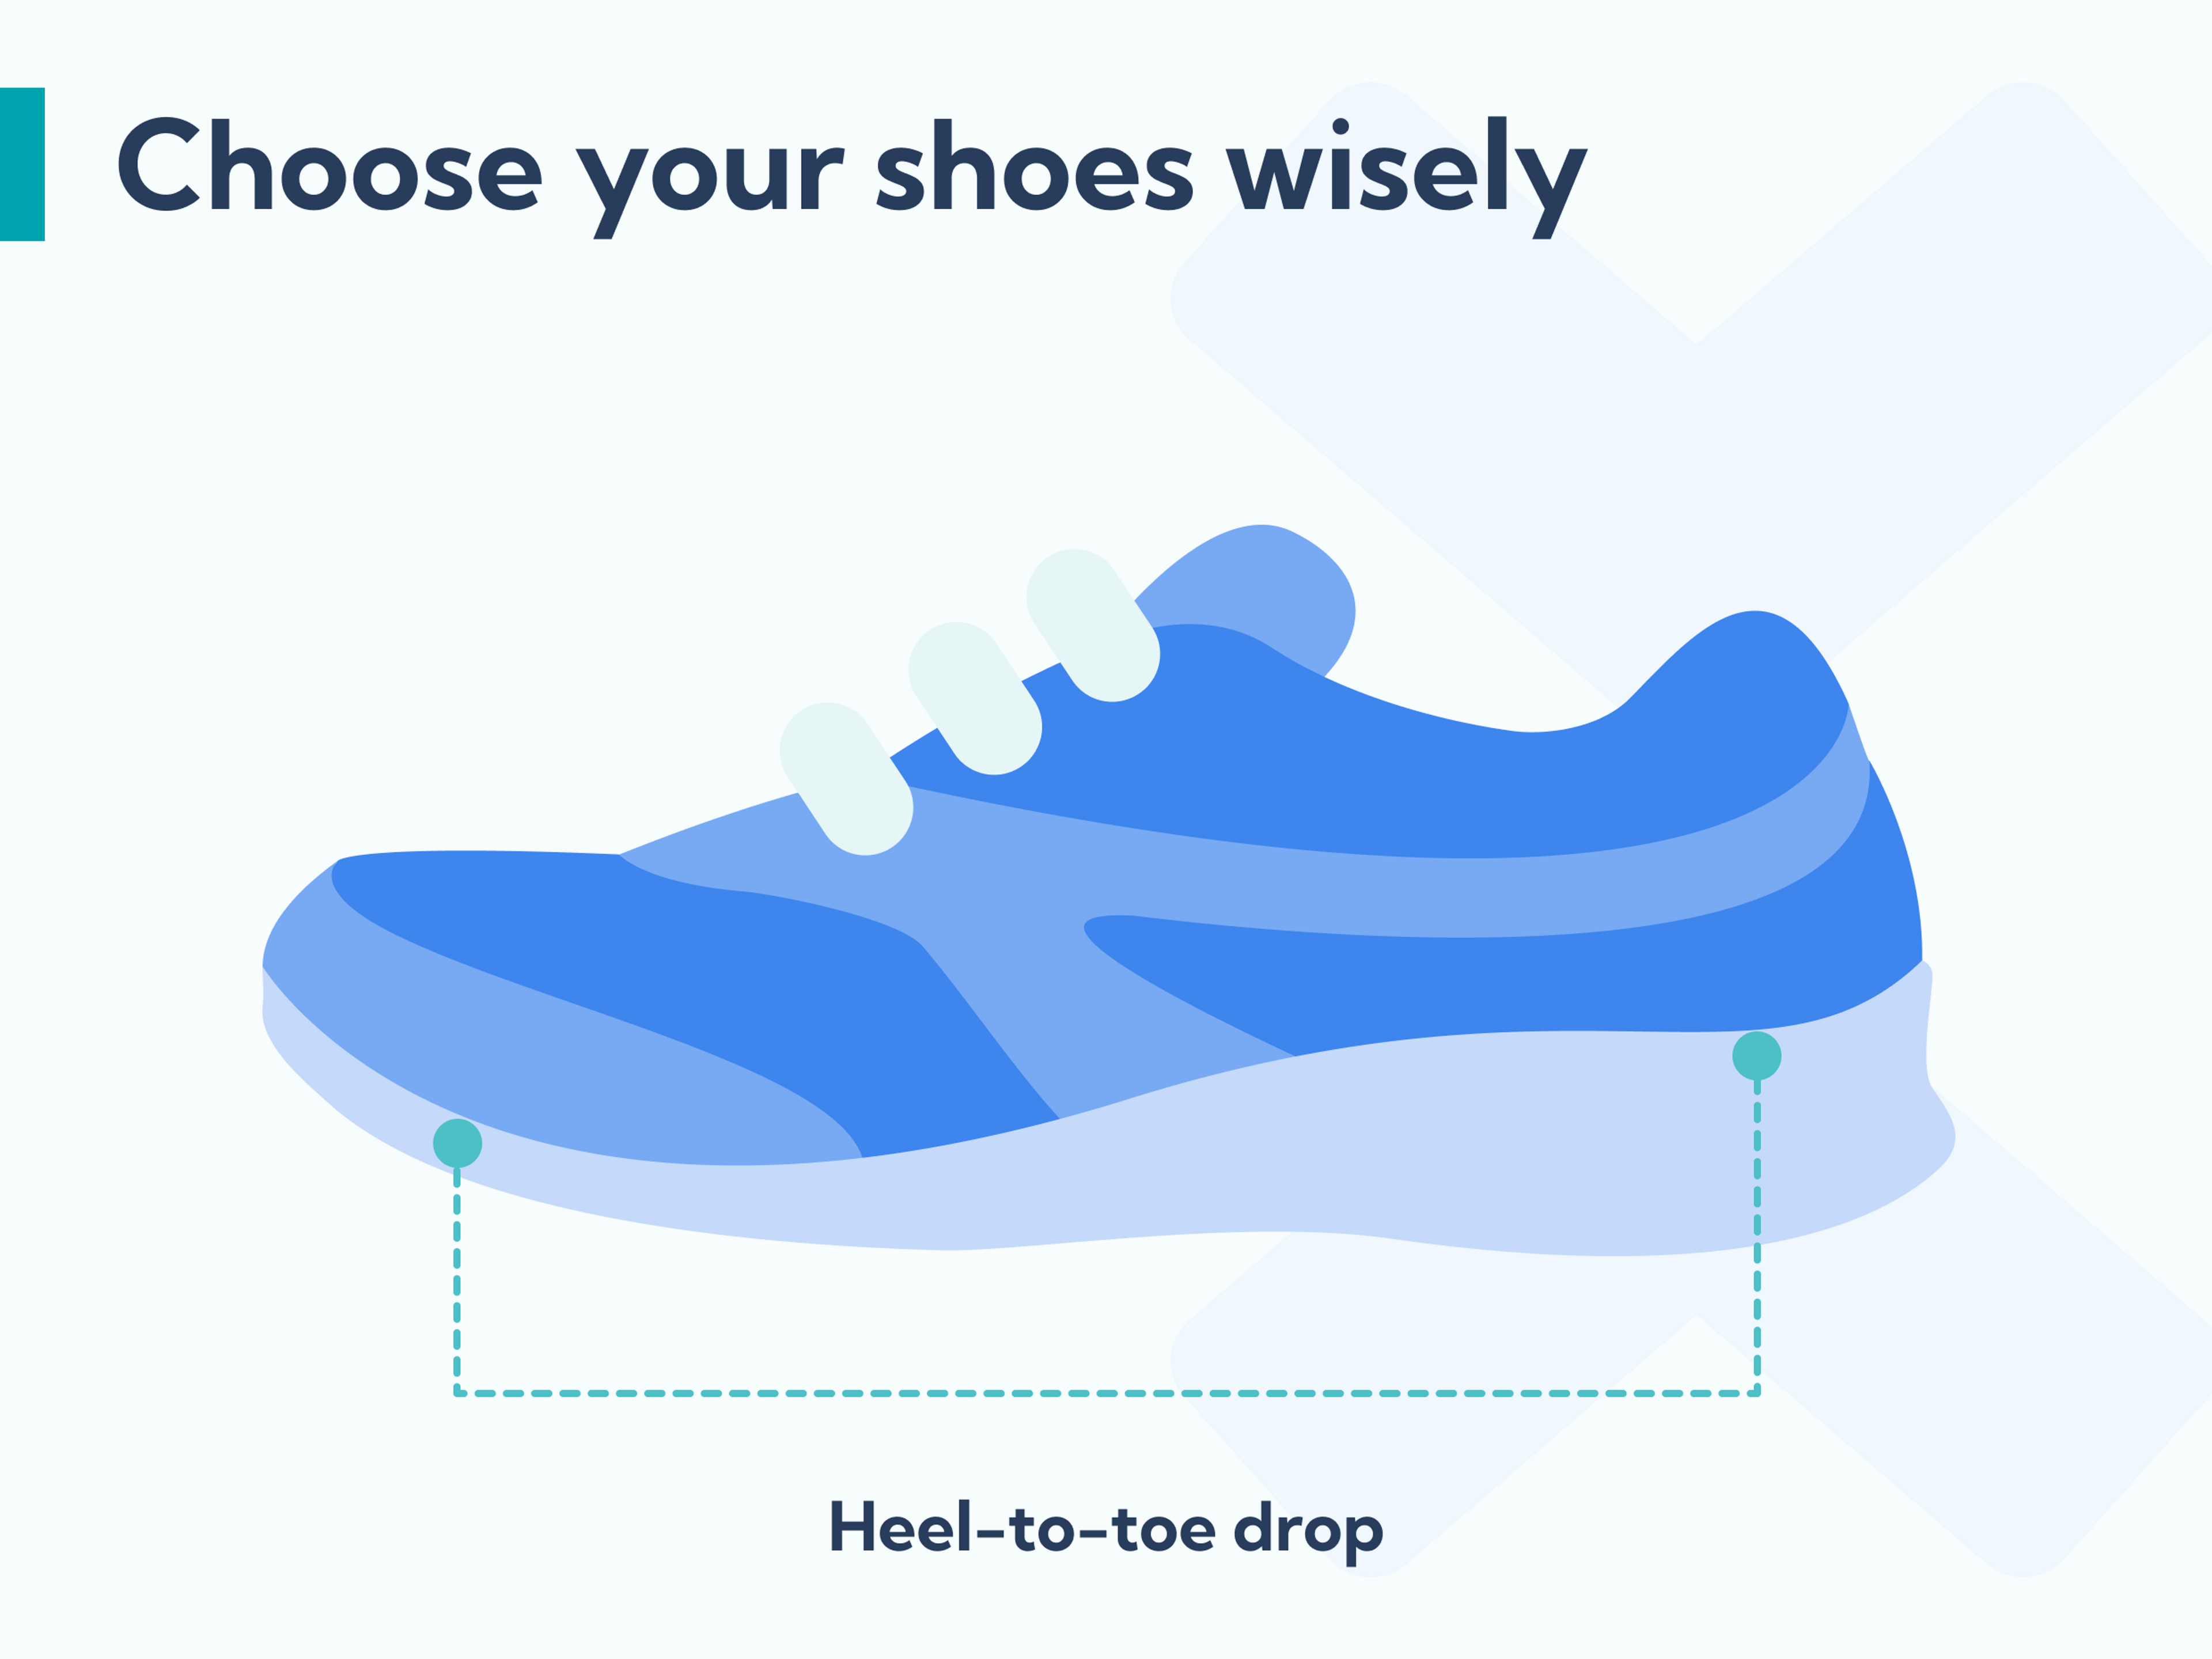 A running shoe with a slightly higher heel reduces the strain on your Achilles tendon.